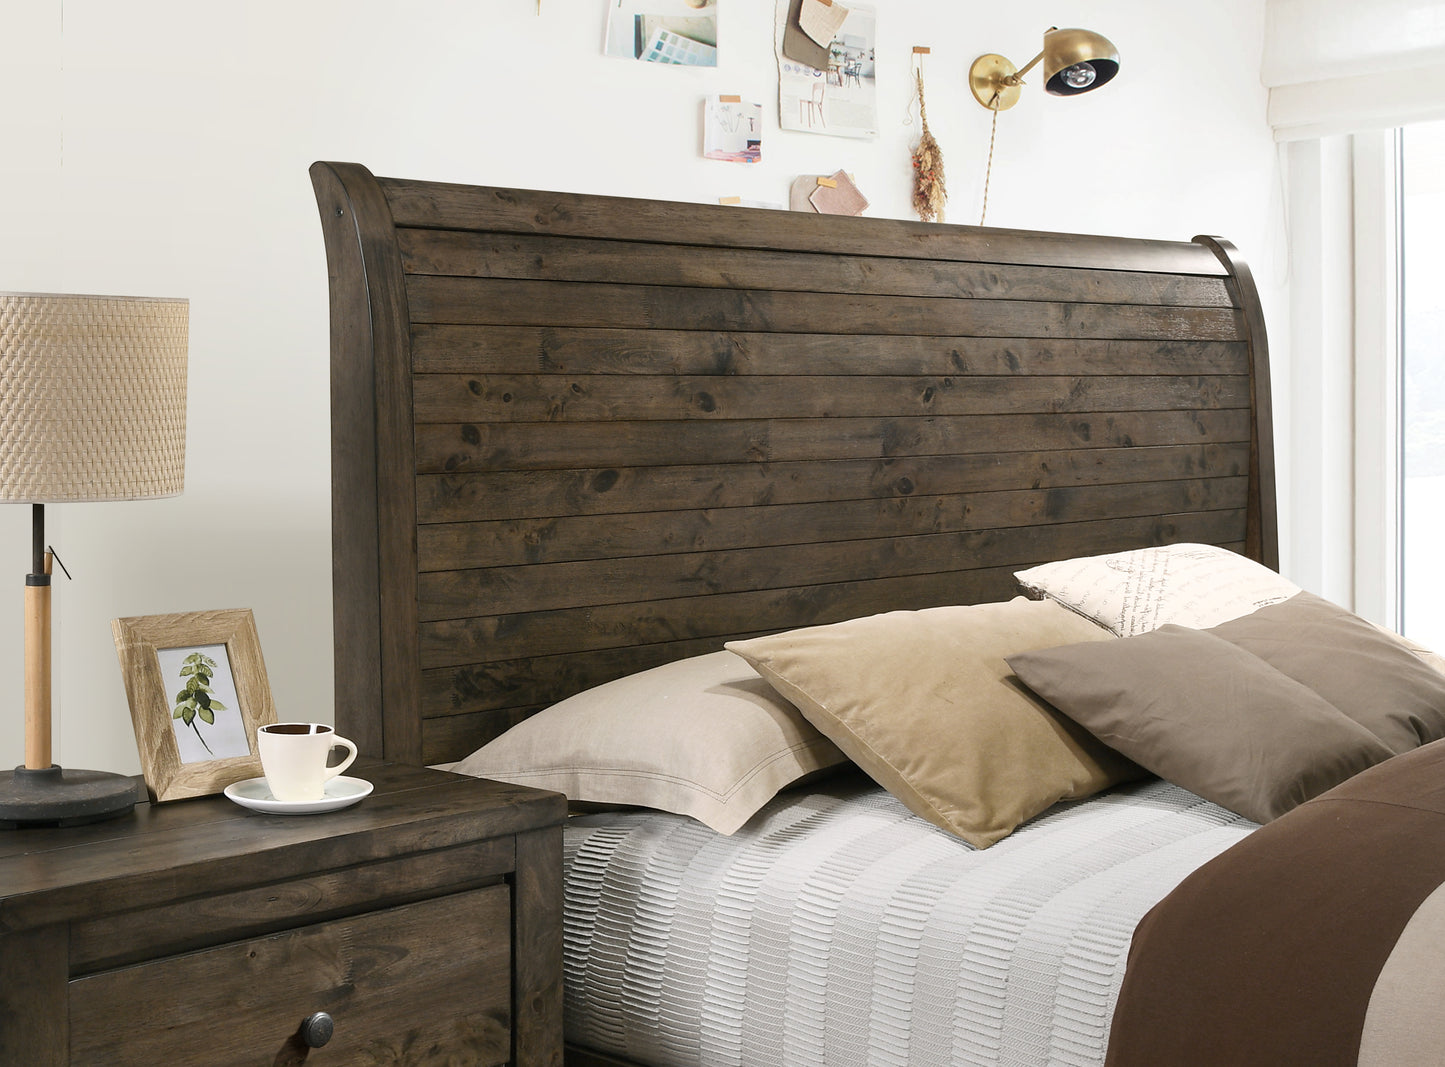 Pavita Rustic Sleigh Bed Collection